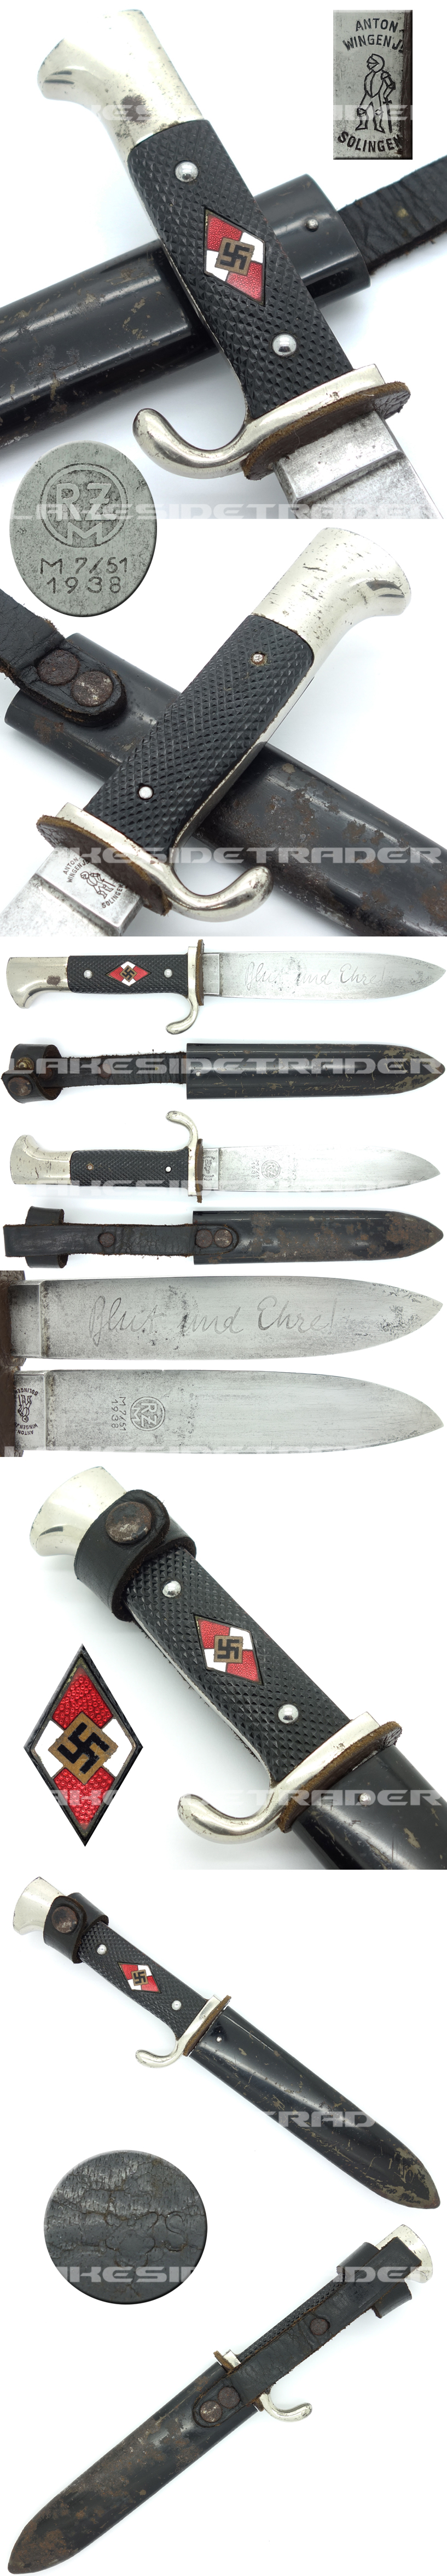 Transitional Hitler Youth Knife by A. Wingen 1938